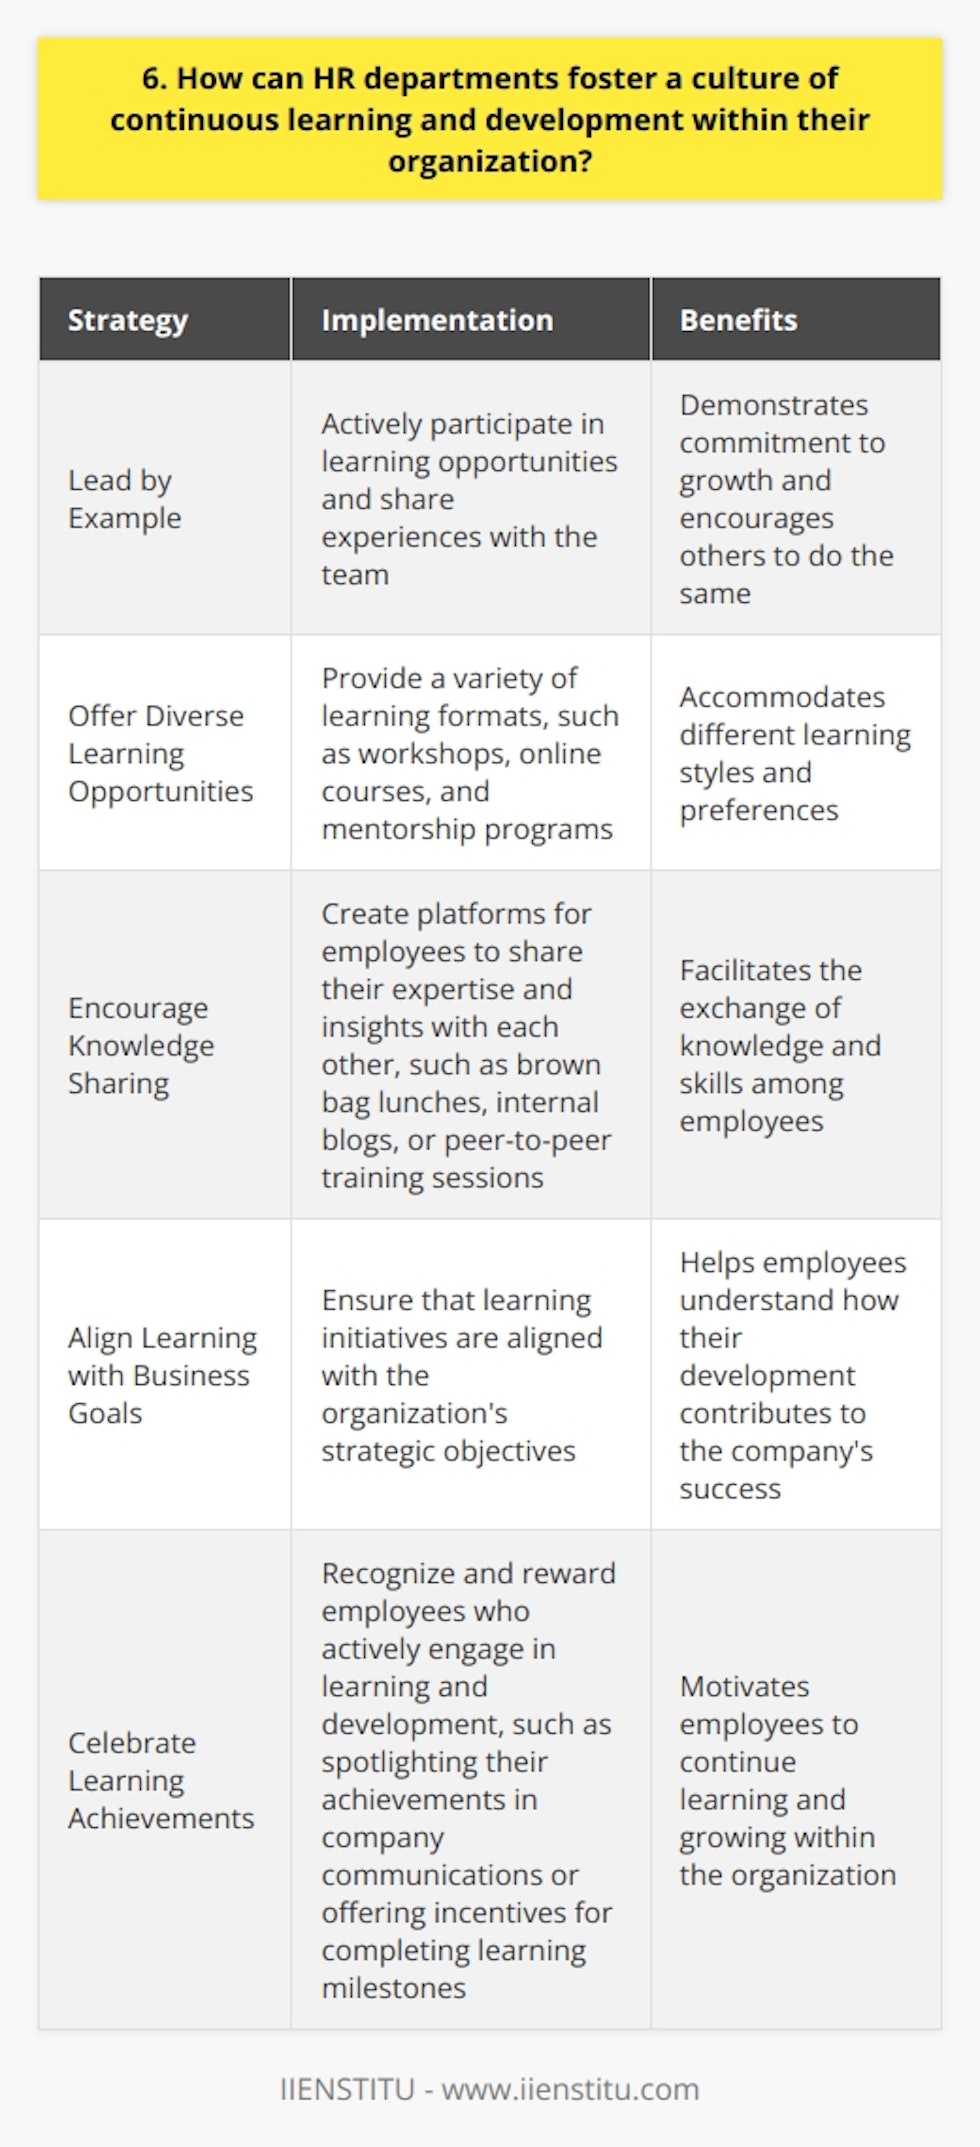 As an HR professional, I believe that fostering a culture of continuous learning and development is crucial for any organizations success. Here are some strategies that I would implement: Lead by Example I would actively participate in learning opportunities and share my experiences with the team. This demonstrates a commitment to growth and encourages others to do the same. Offer Diverse Learning Opportunities I would provide a variety of learning formats, such as workshops, online courses, and mentorship programs. This accommodates different learning styles and preferences. Encourage Knowledge Sharing I would create platforms for employees to share their expertise and insights with each other. This could include brown bag lunches, internal blogs, or peer-to-peer training sessions. Align Learning with Business Goals I would ensure that learning initiatives are aligned with the organizations strategic objectives. This helps employees understand how their development contributes to the companys success. Celebrate Learning Achievements I would recognize and reward employees who actively engage in learning and development. This could include spotlighting their achievements in company communications or offering incentives for completing learning milestones. By implementing these strategies, I believe that HR can create a culture where employees are excited about learning and feel supported in their growth and development. This not only benefits the individual employees but also strengthens the organization as a whole.